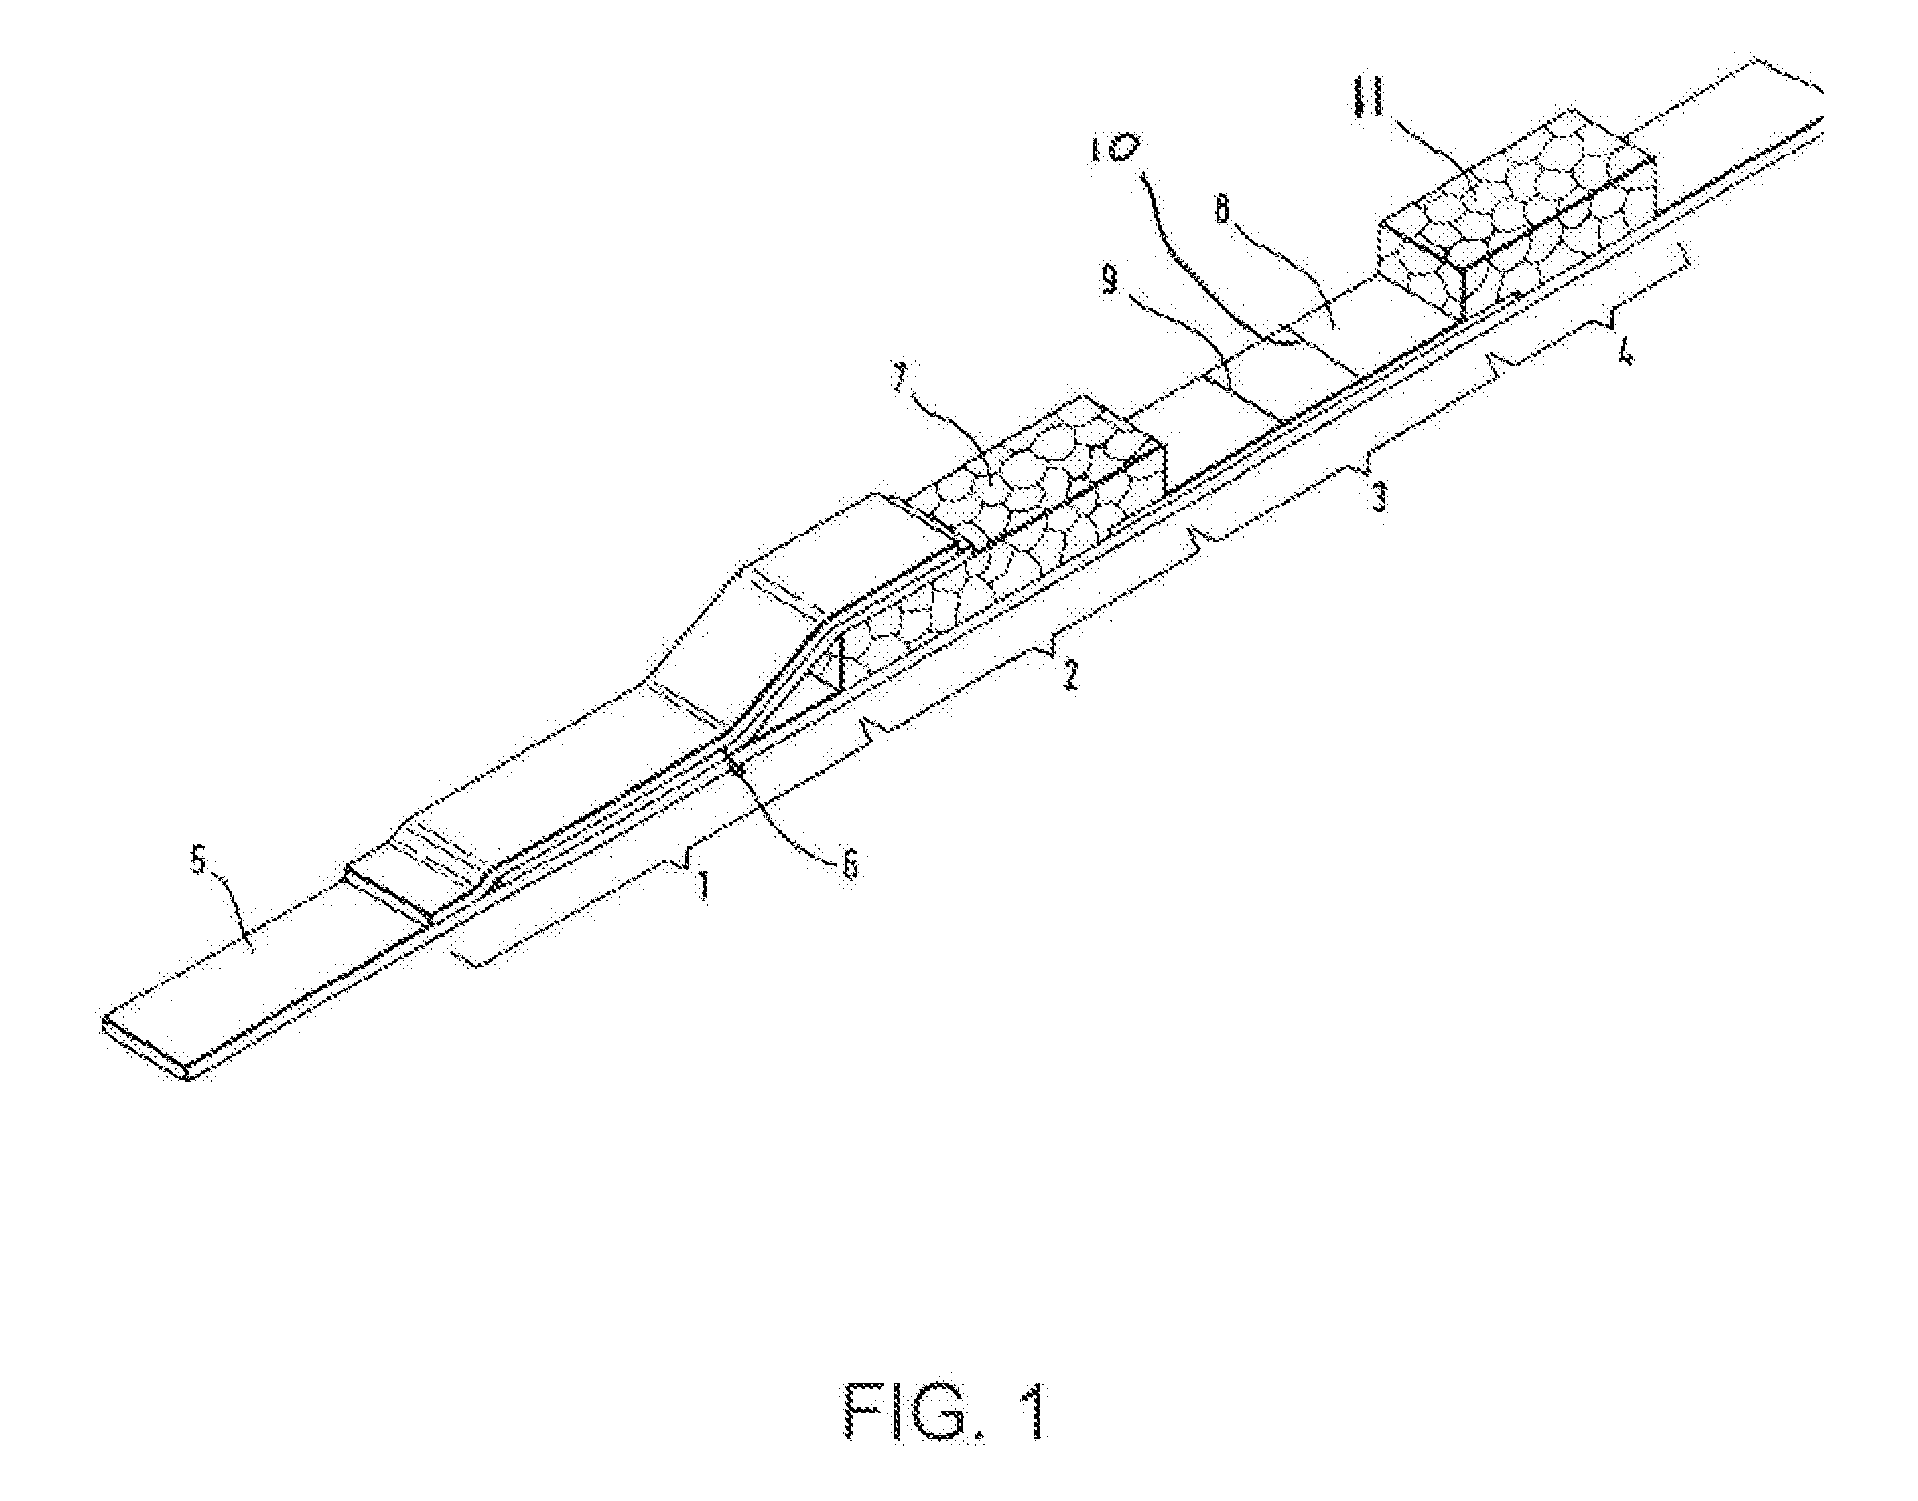 Method for Increasing the Dynamic Measuring Range of Test Elements Based on Specific Binding Reactions